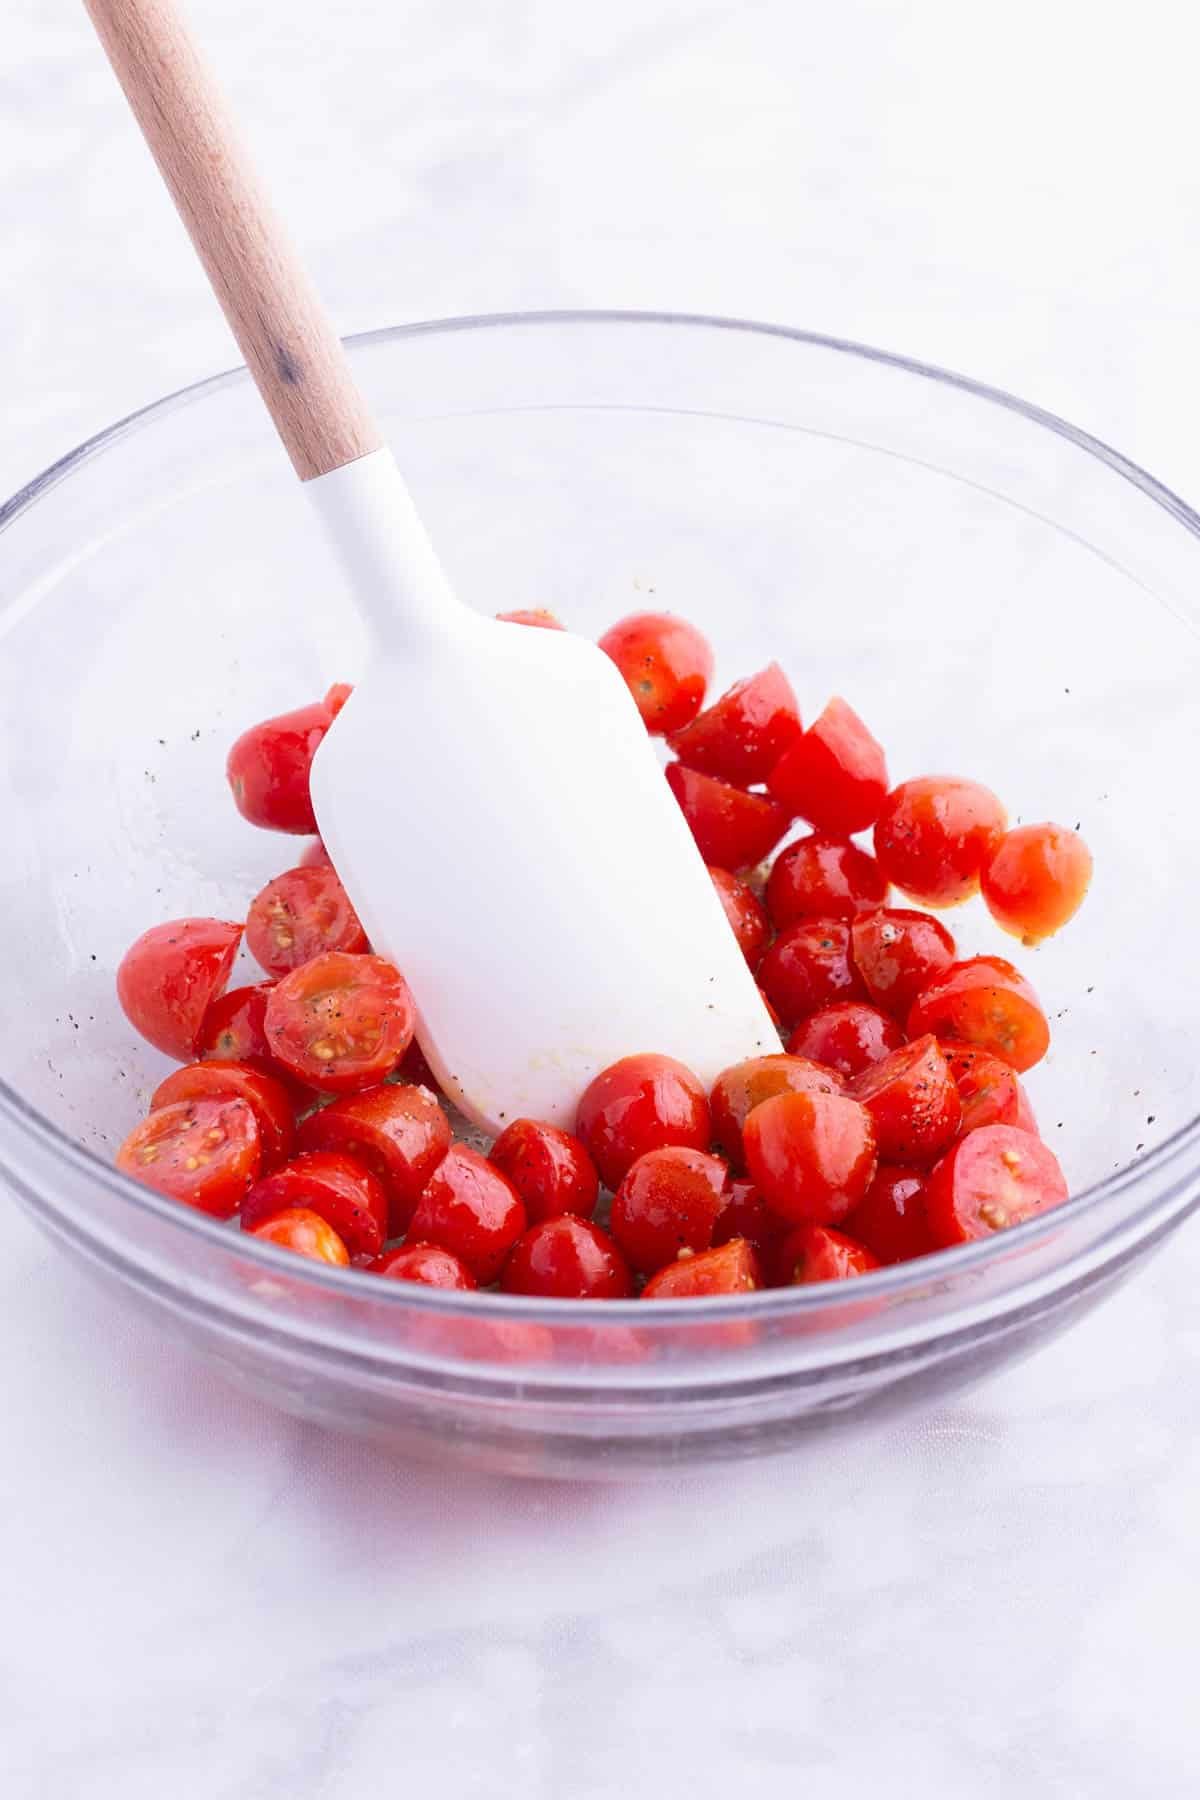 Cherry tomatoes are tossed in a garlic sauce.